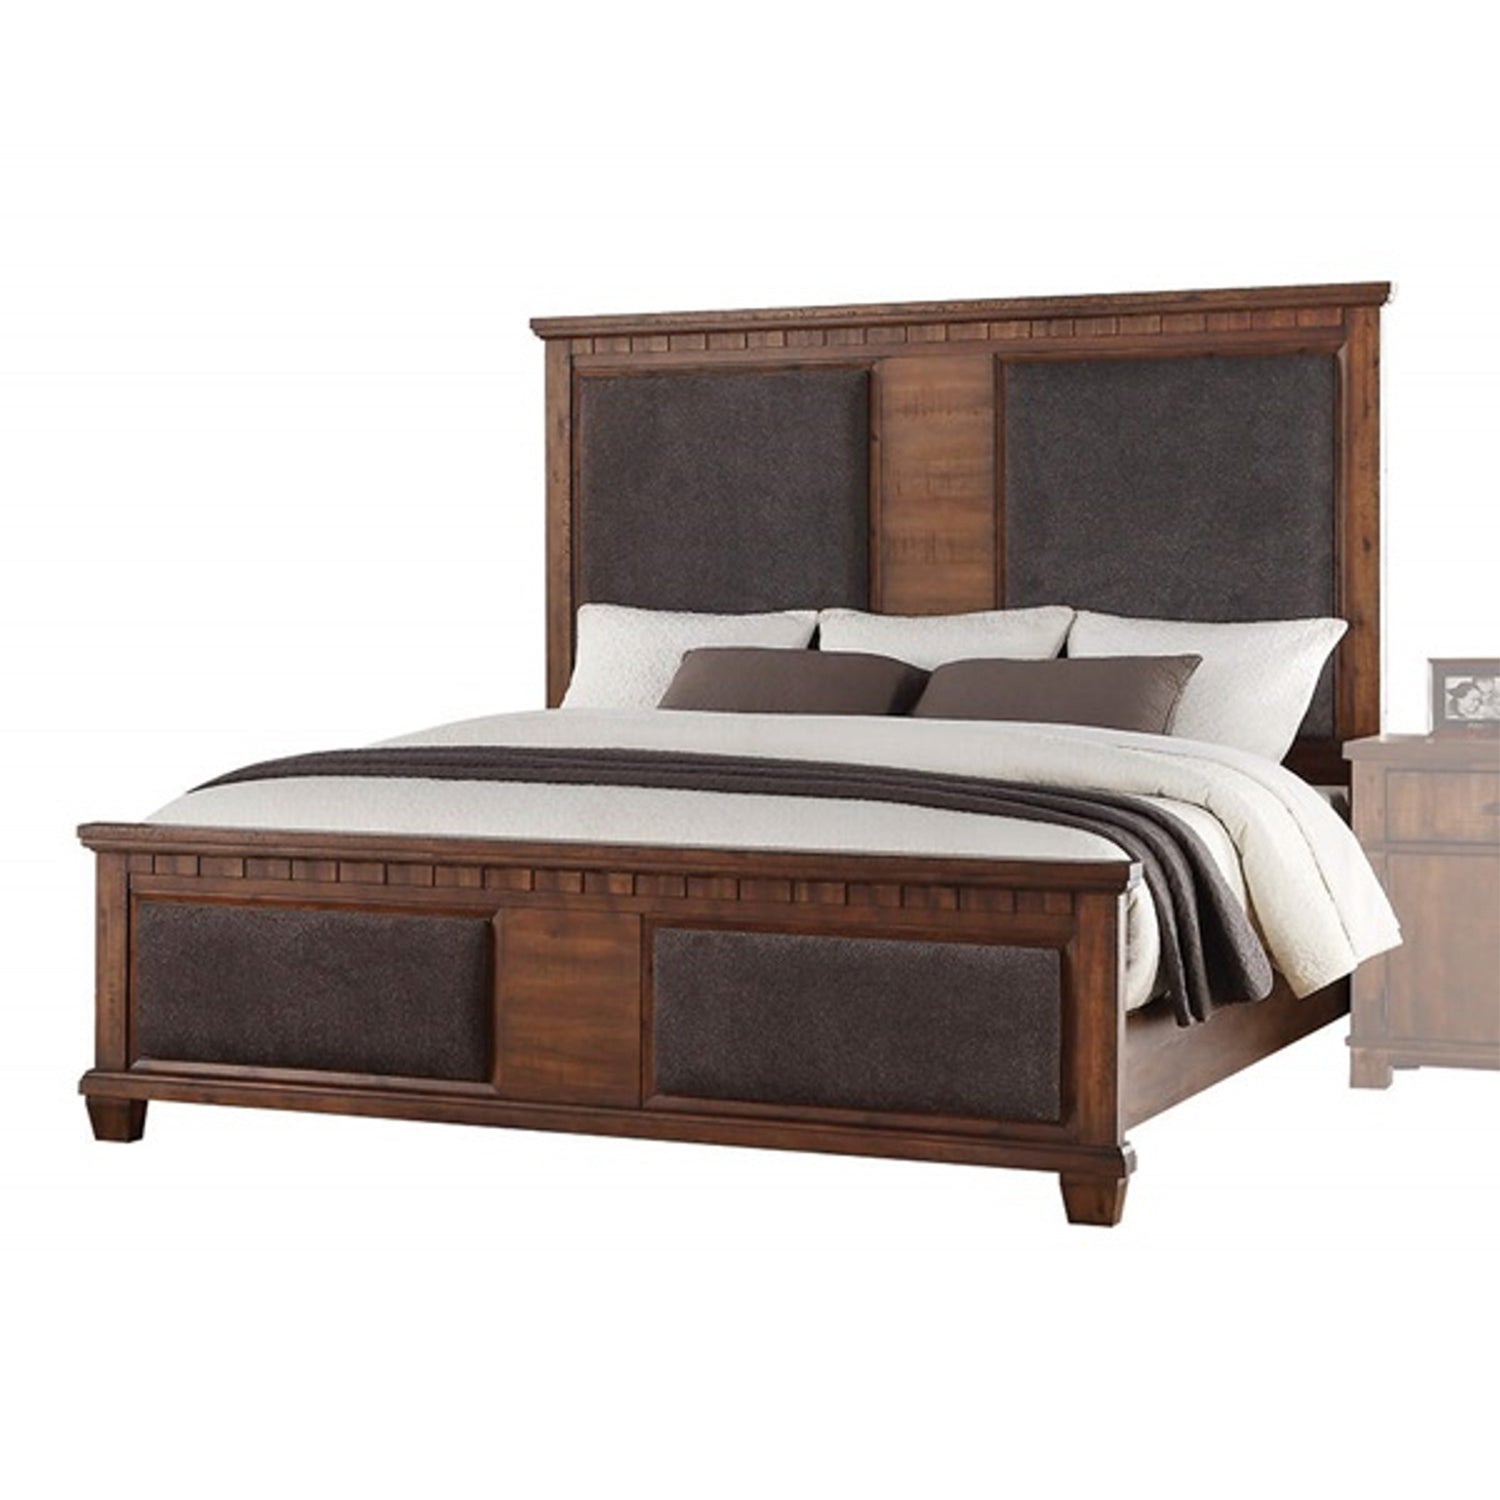 66" X 89" X 68" Brown Fabric Cherry Oak Wood Upholstered (HBFB) Queen Bed Default Title